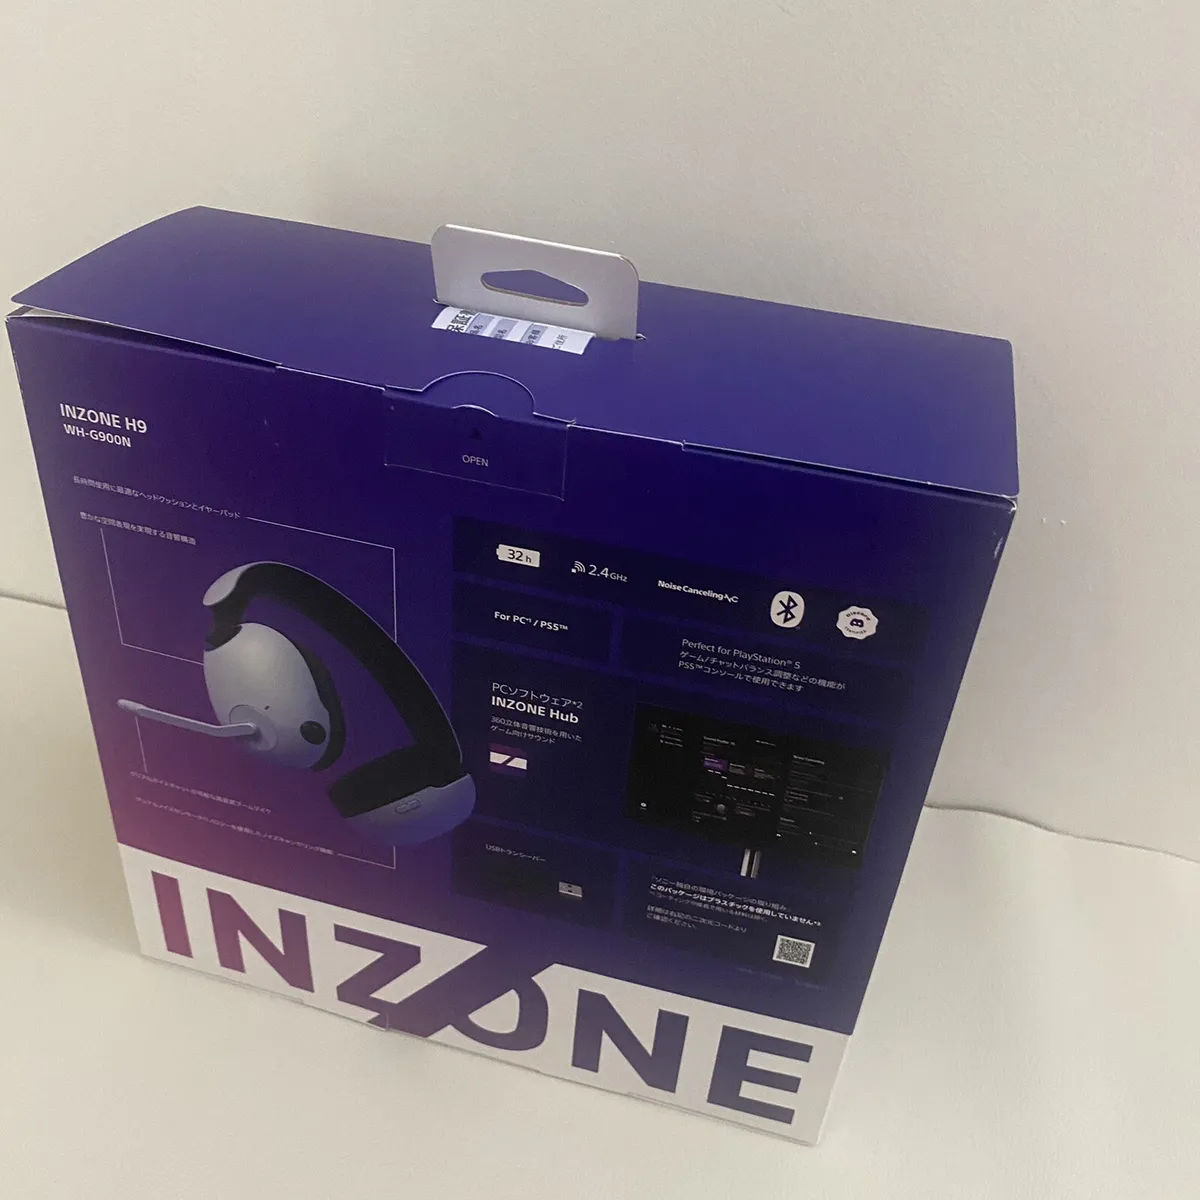 Sony Gaming Headset INZONE H9 WH-G900N bluetooth with Neucan